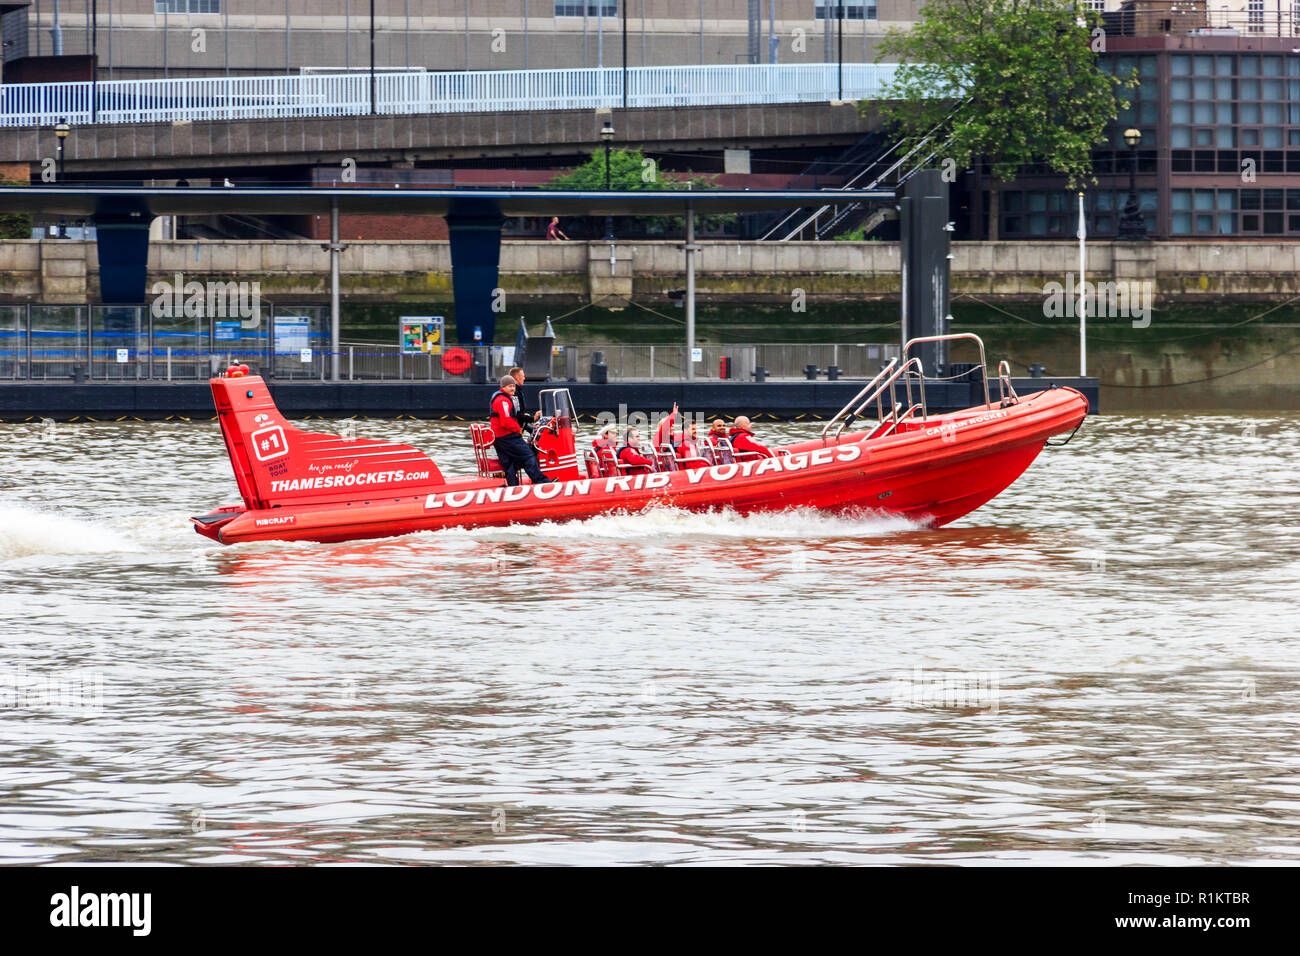 Red high speed 'London RIB Voyages' sightseeing boat on the River Thames at Blackfriars, London, UK Stock Photo